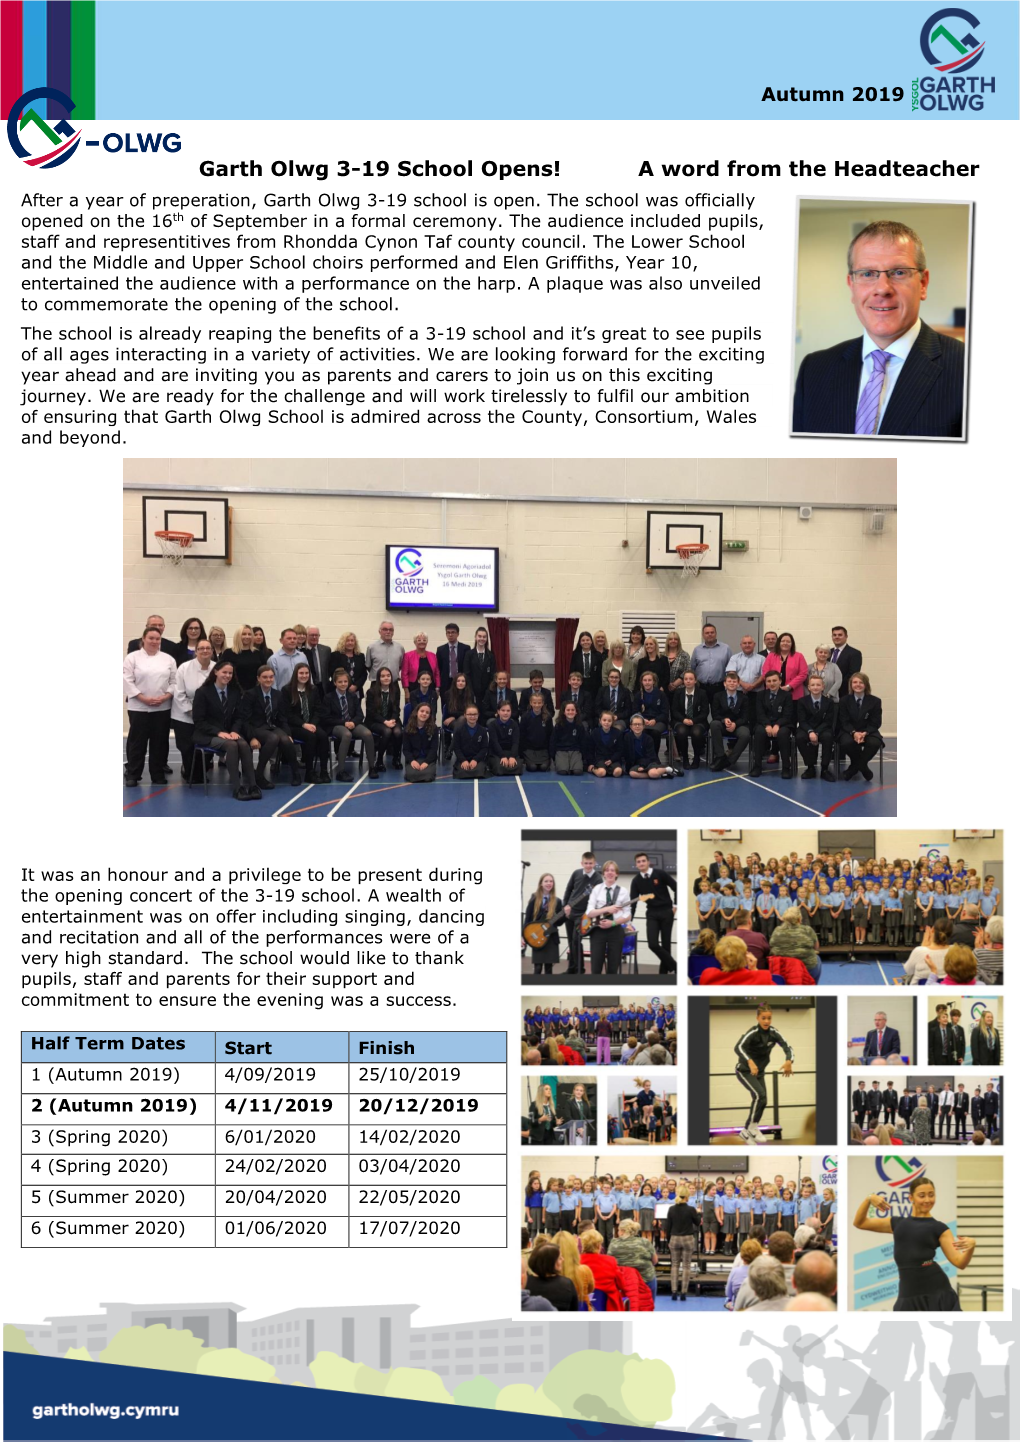 Garth Olwg 3-19 School Opens! a Word from the Headteacher After a Year of Preperation, Garth Olwg 3-19 School Is Open